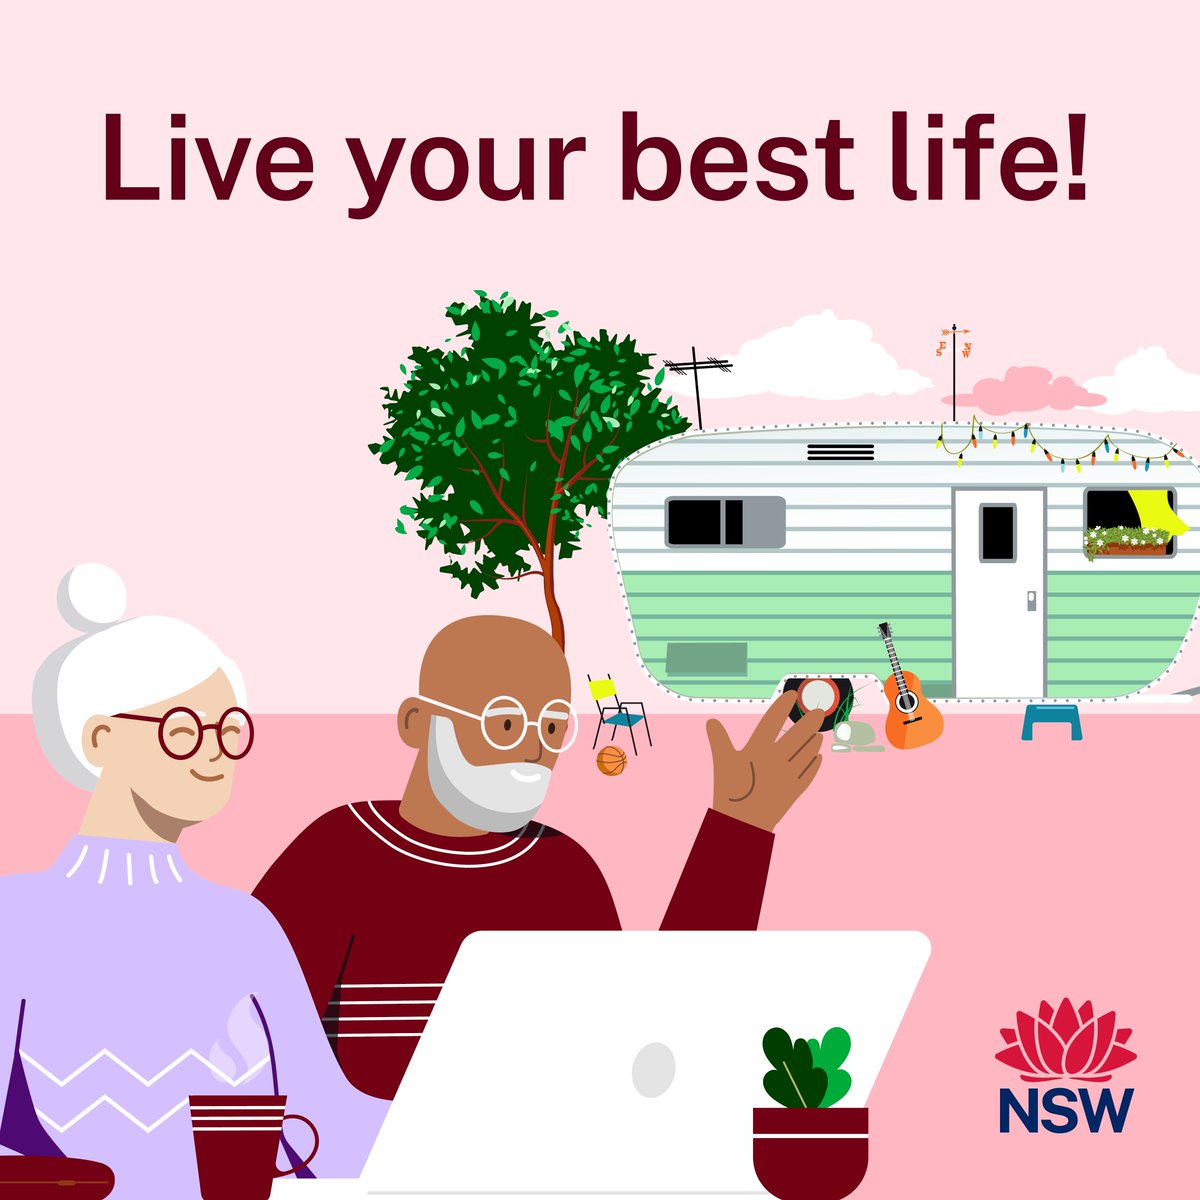 Getting a flu vaccine is quick, easy and free for people aged 65 and over so you can keep doing the things you love this winter - like travelling! Book your flu vaccine today at your doctor or local pharmacy: healthdirect.gov.au/nswfluvaccine